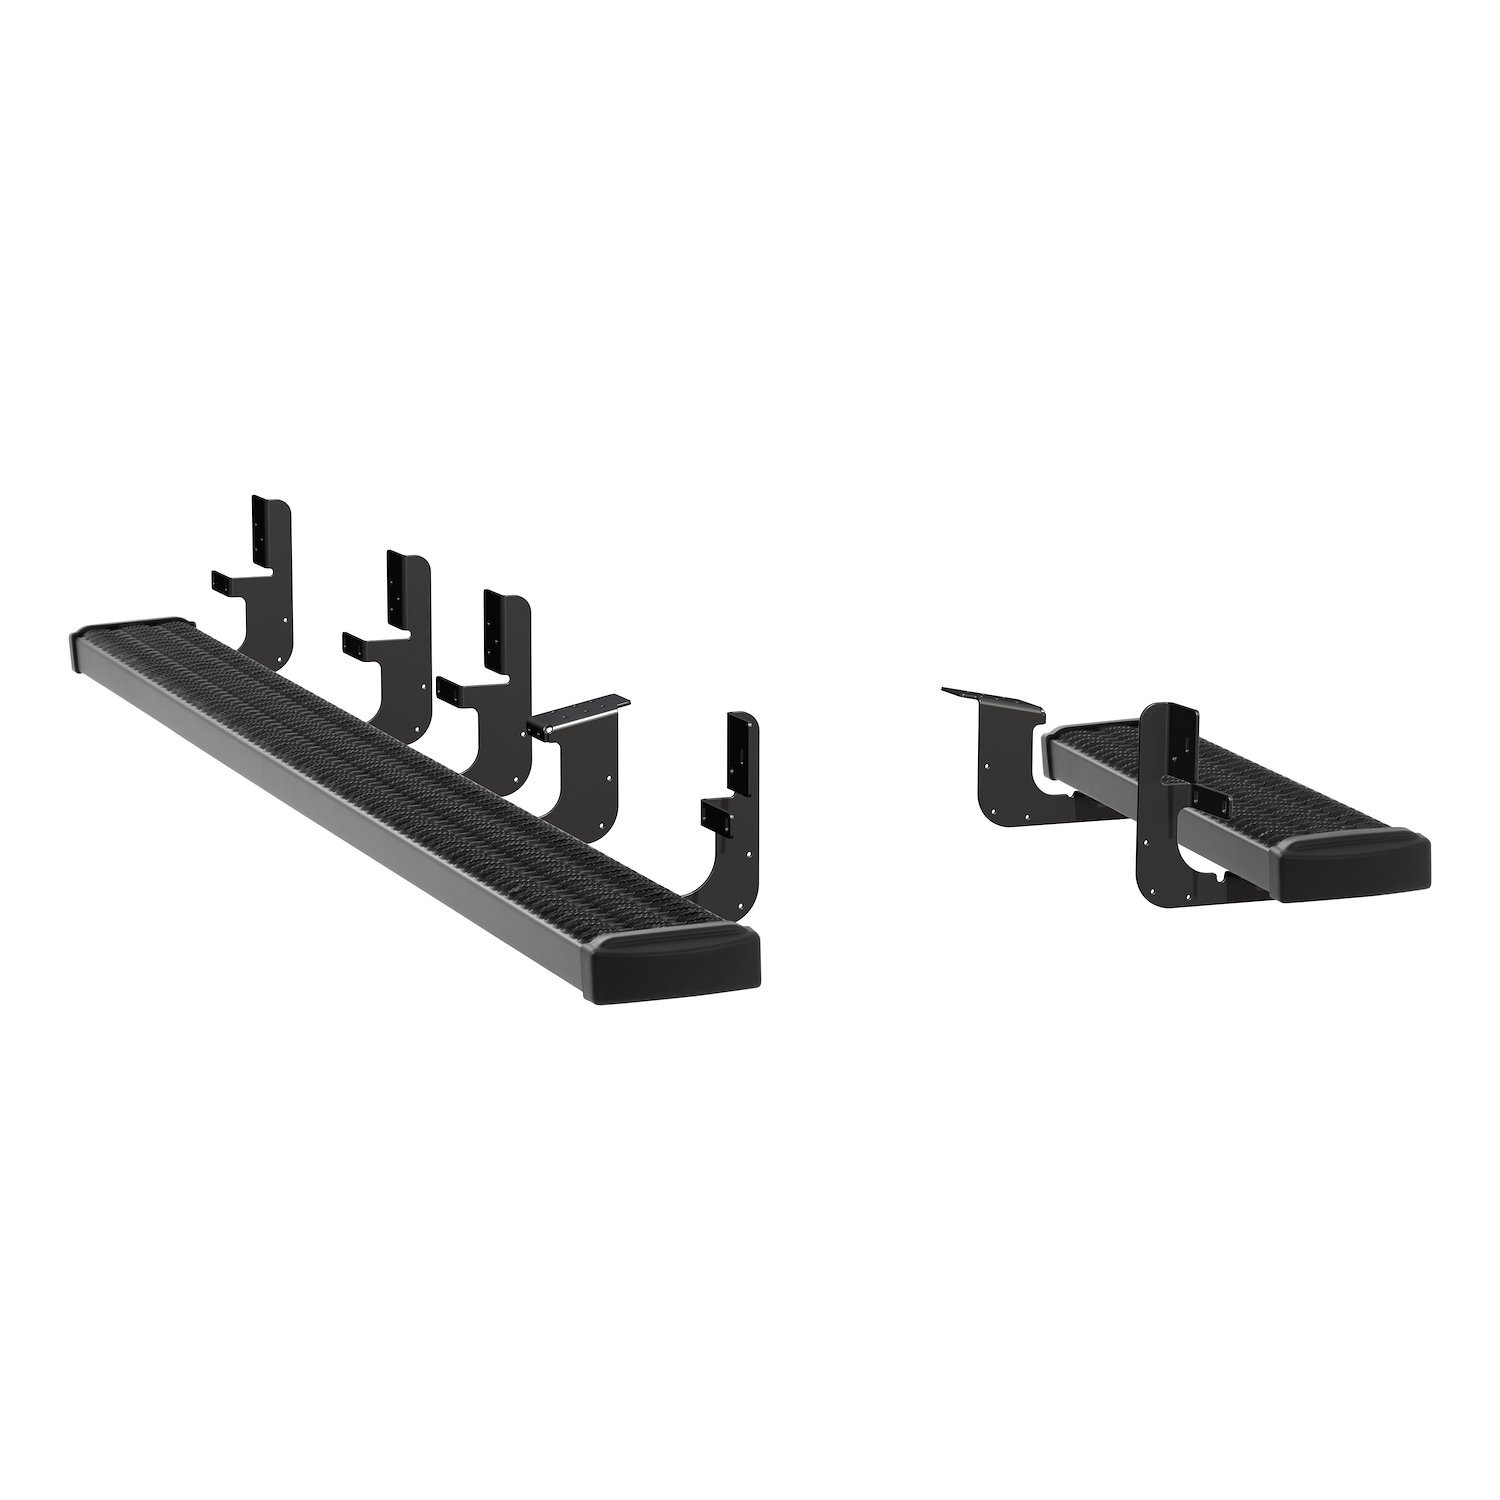 415100-401477 Grip Step 7 in. x 36 in., 100 in. Black Aluminum Running Boards Fits Select Ram ProMaster